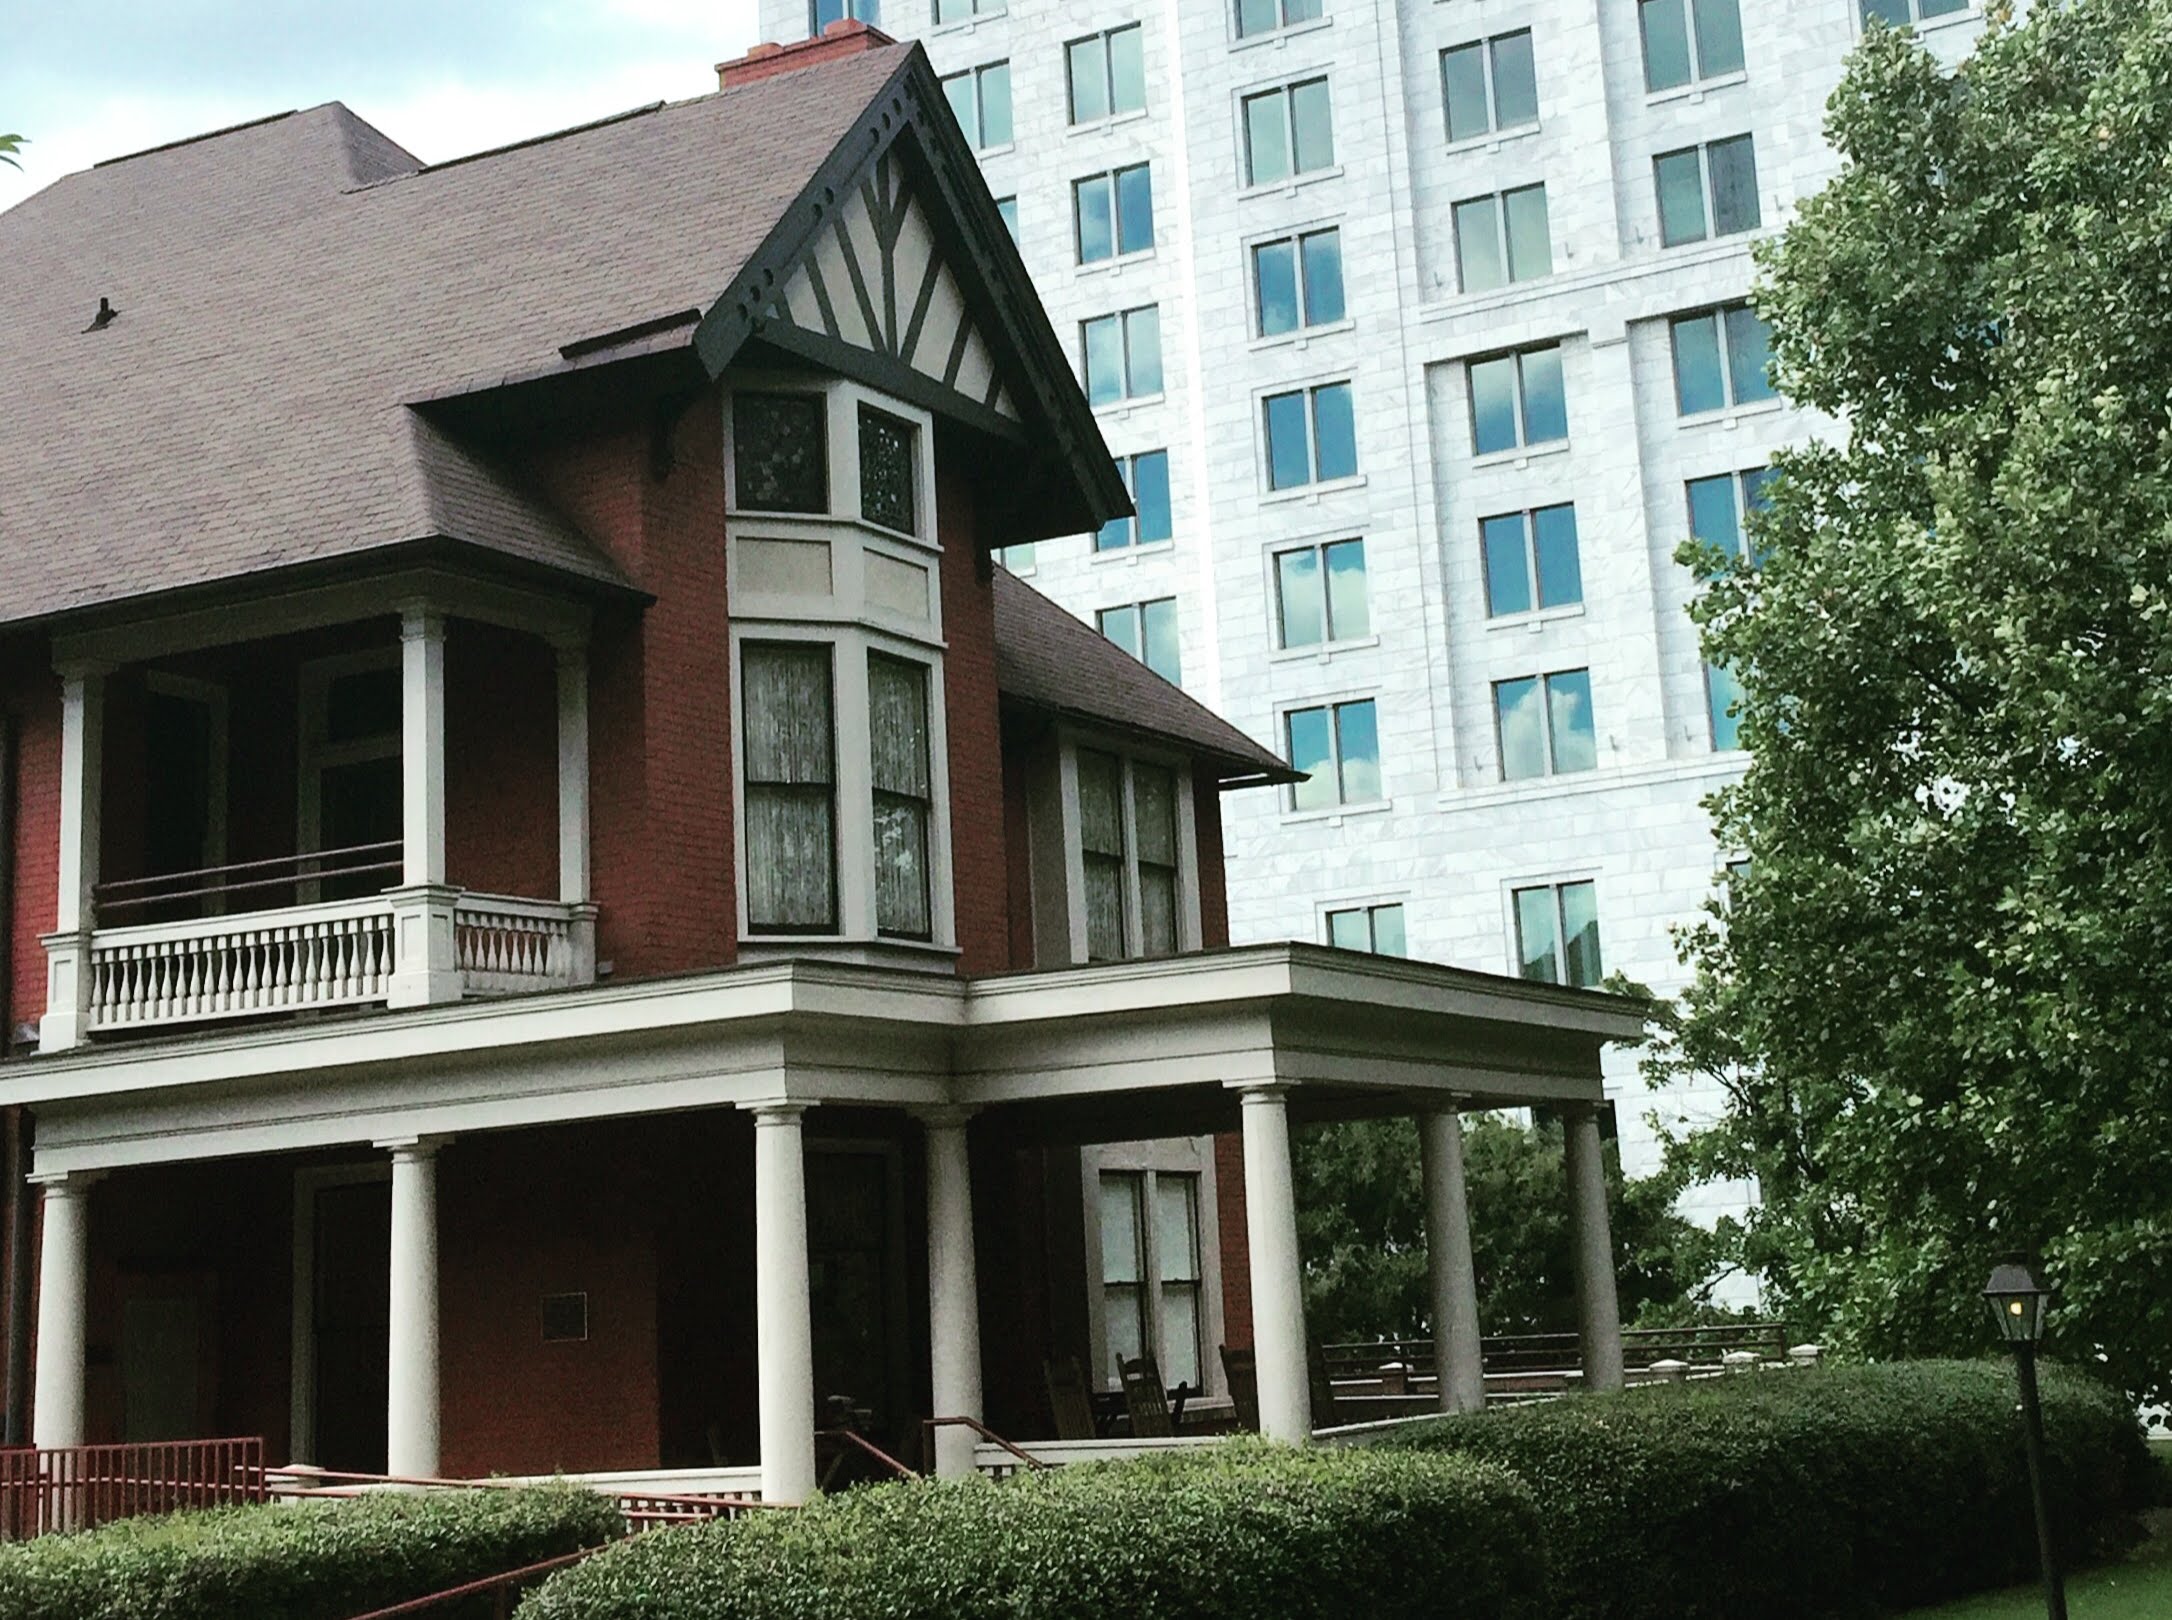 Margaret Mitchell's Gone with the Wind: Private Tour